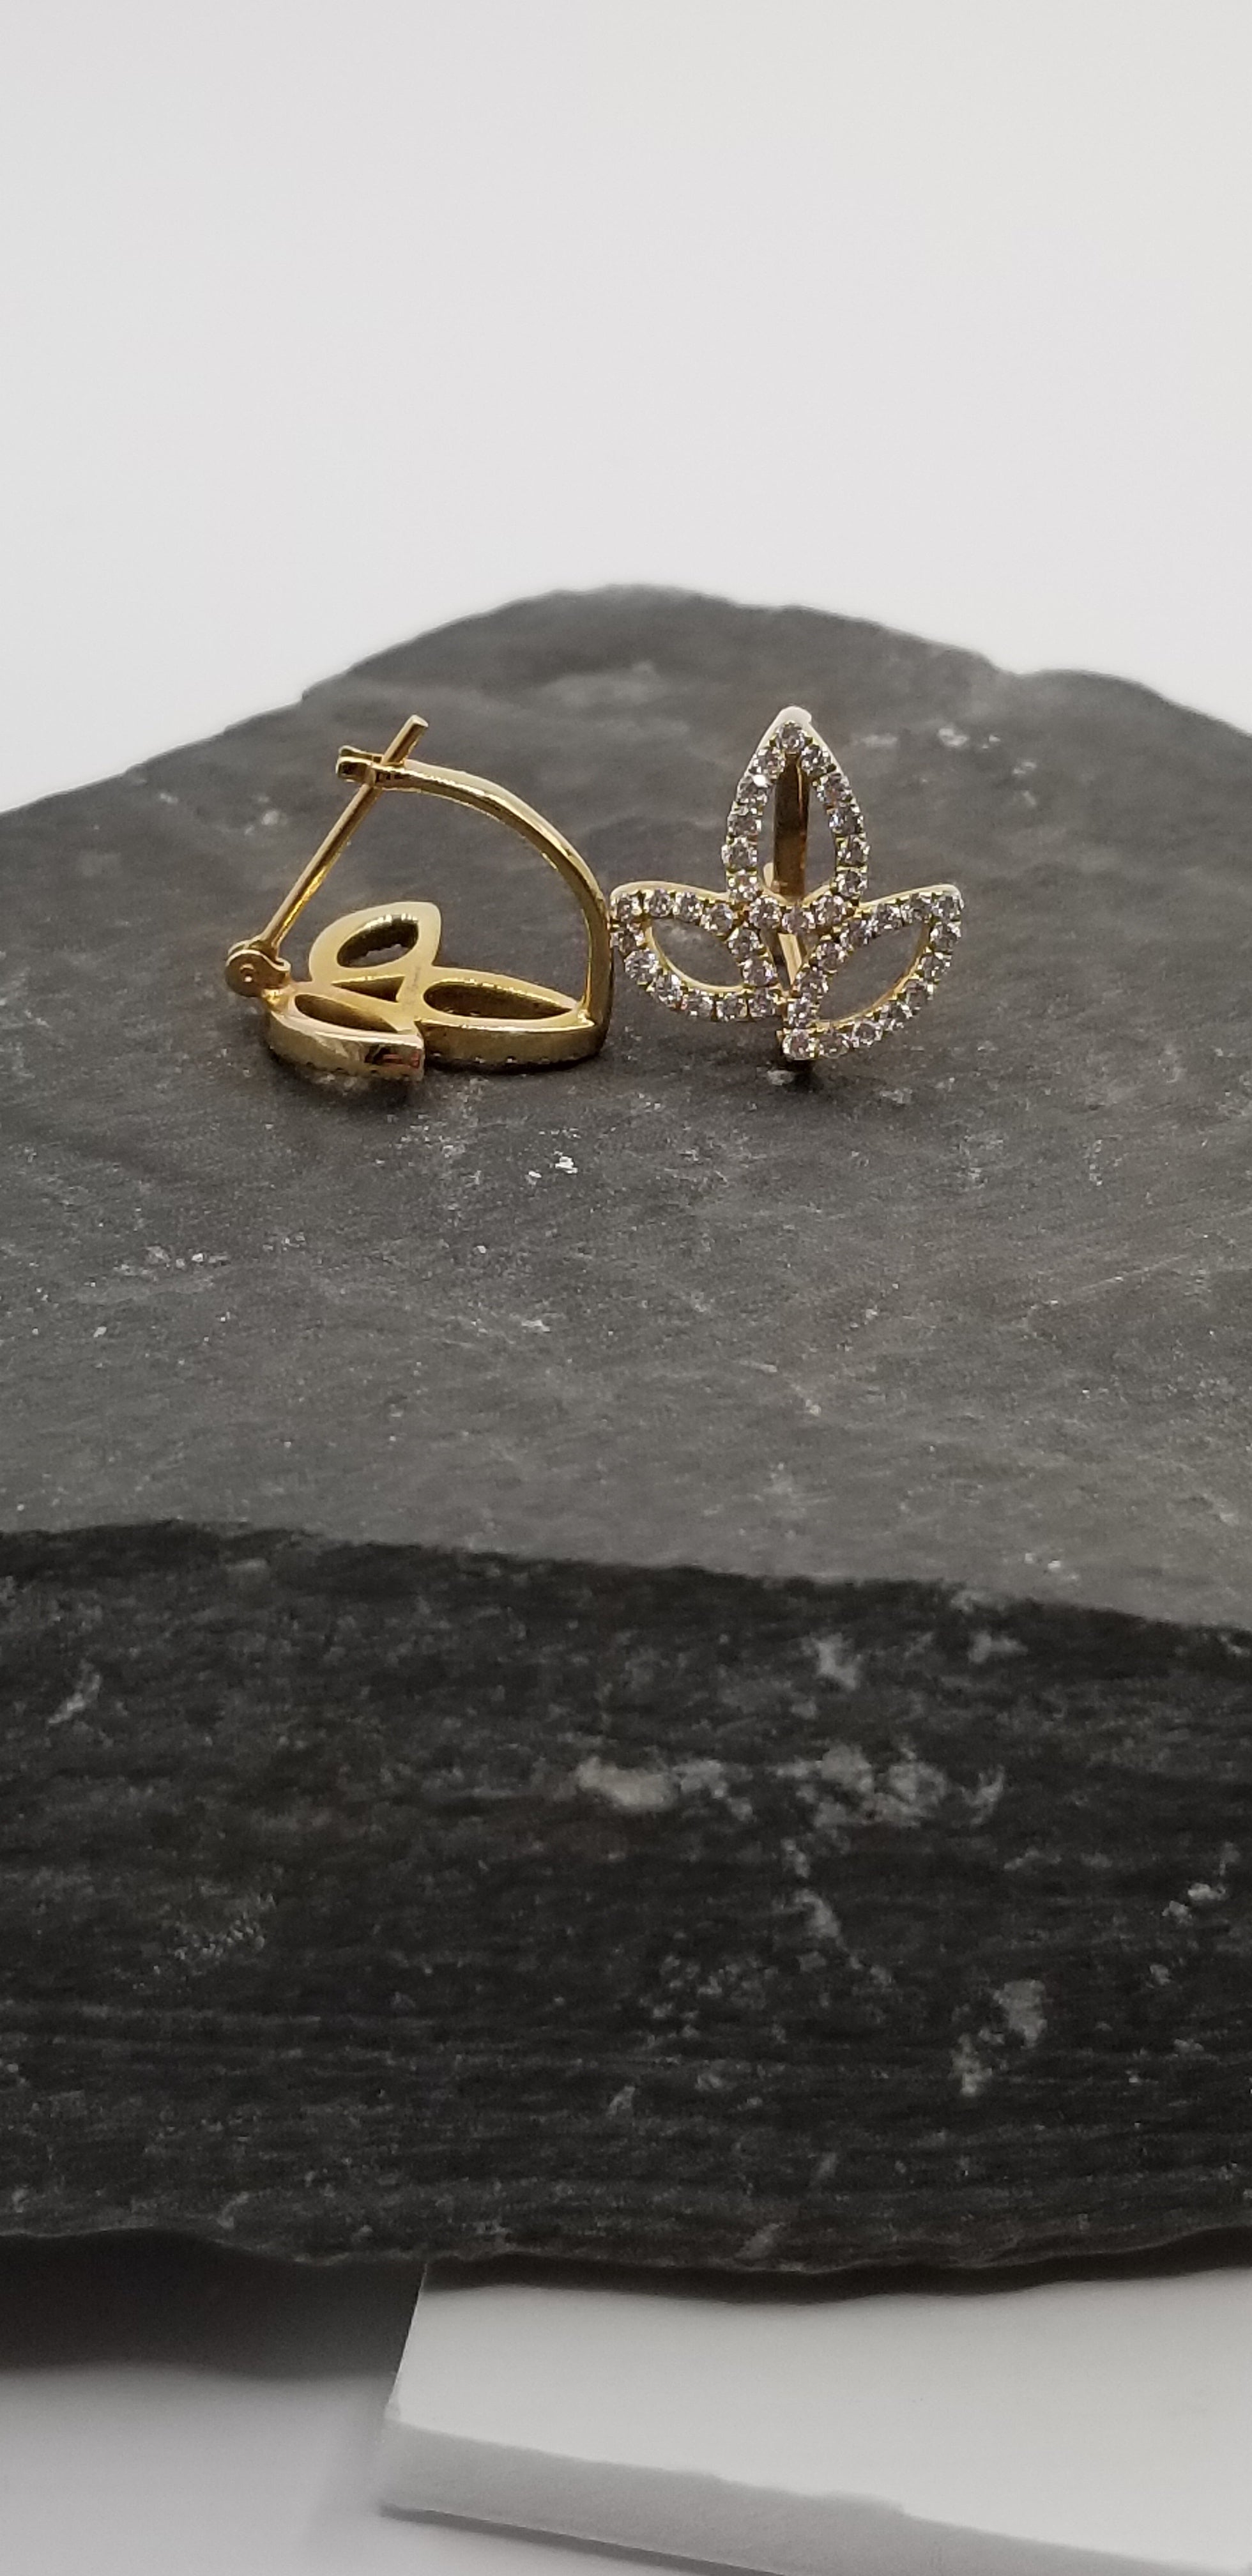 Contemporary 10k Yellow gold & diamond earrings with lots of sparkle!